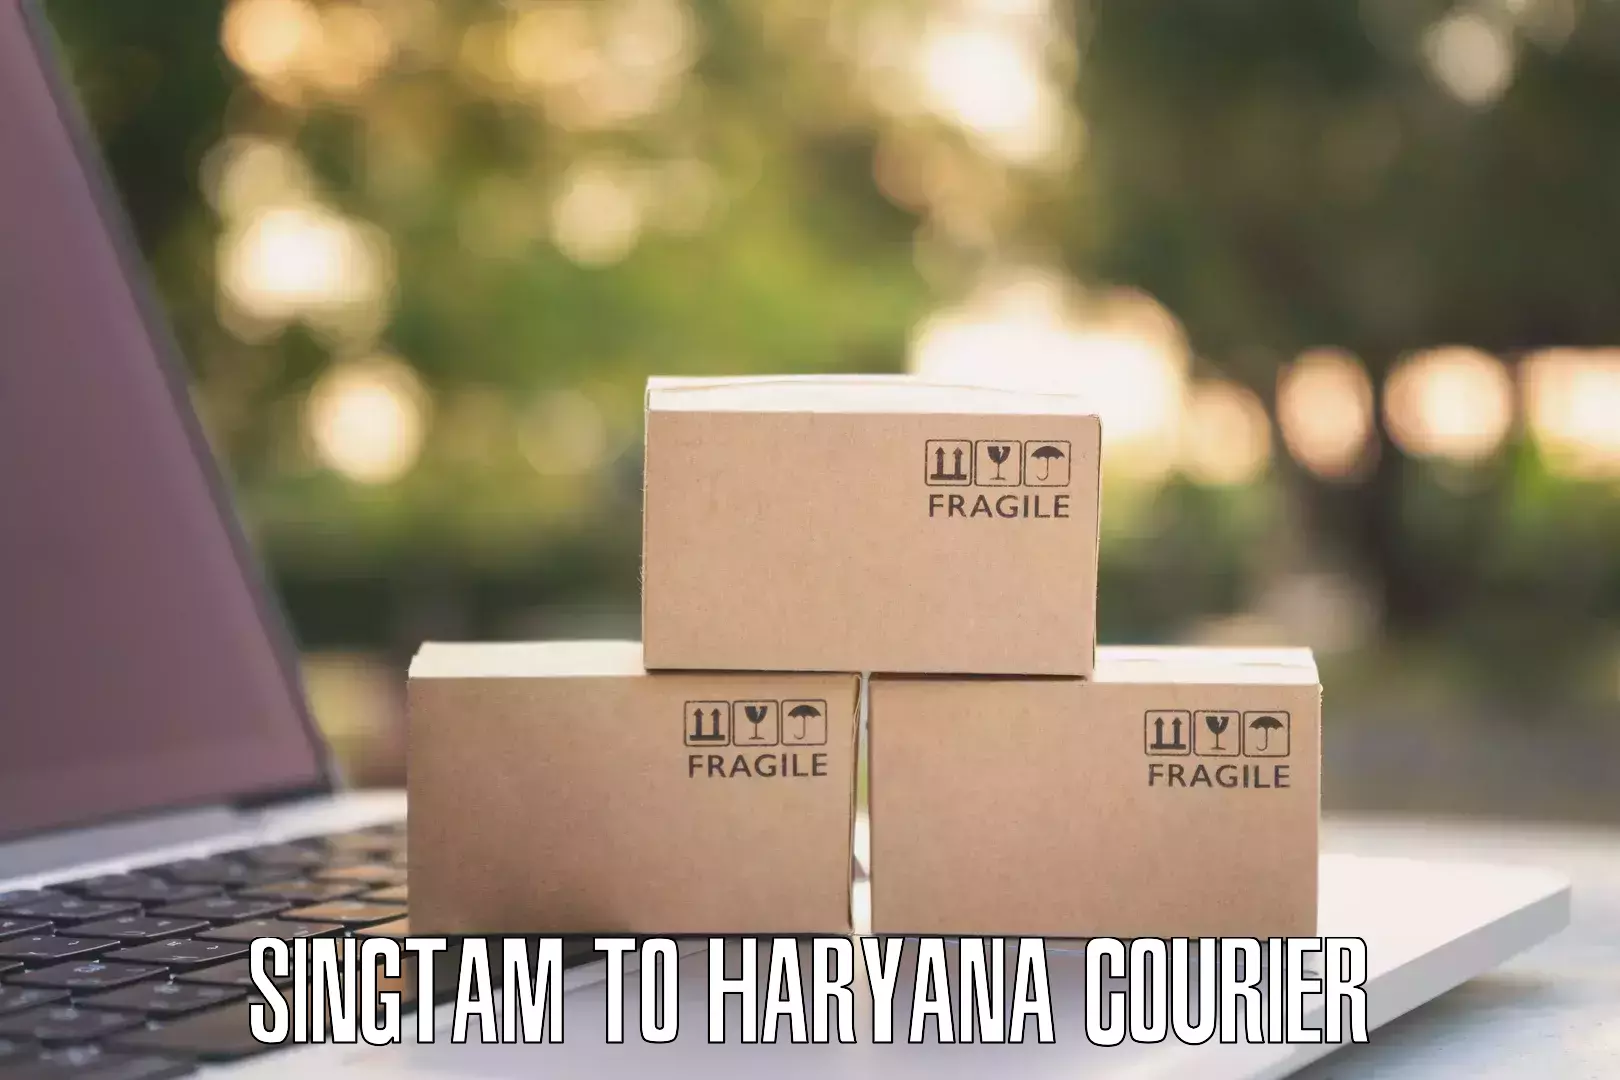 On-demand courier in Singtam to NCR Haryana